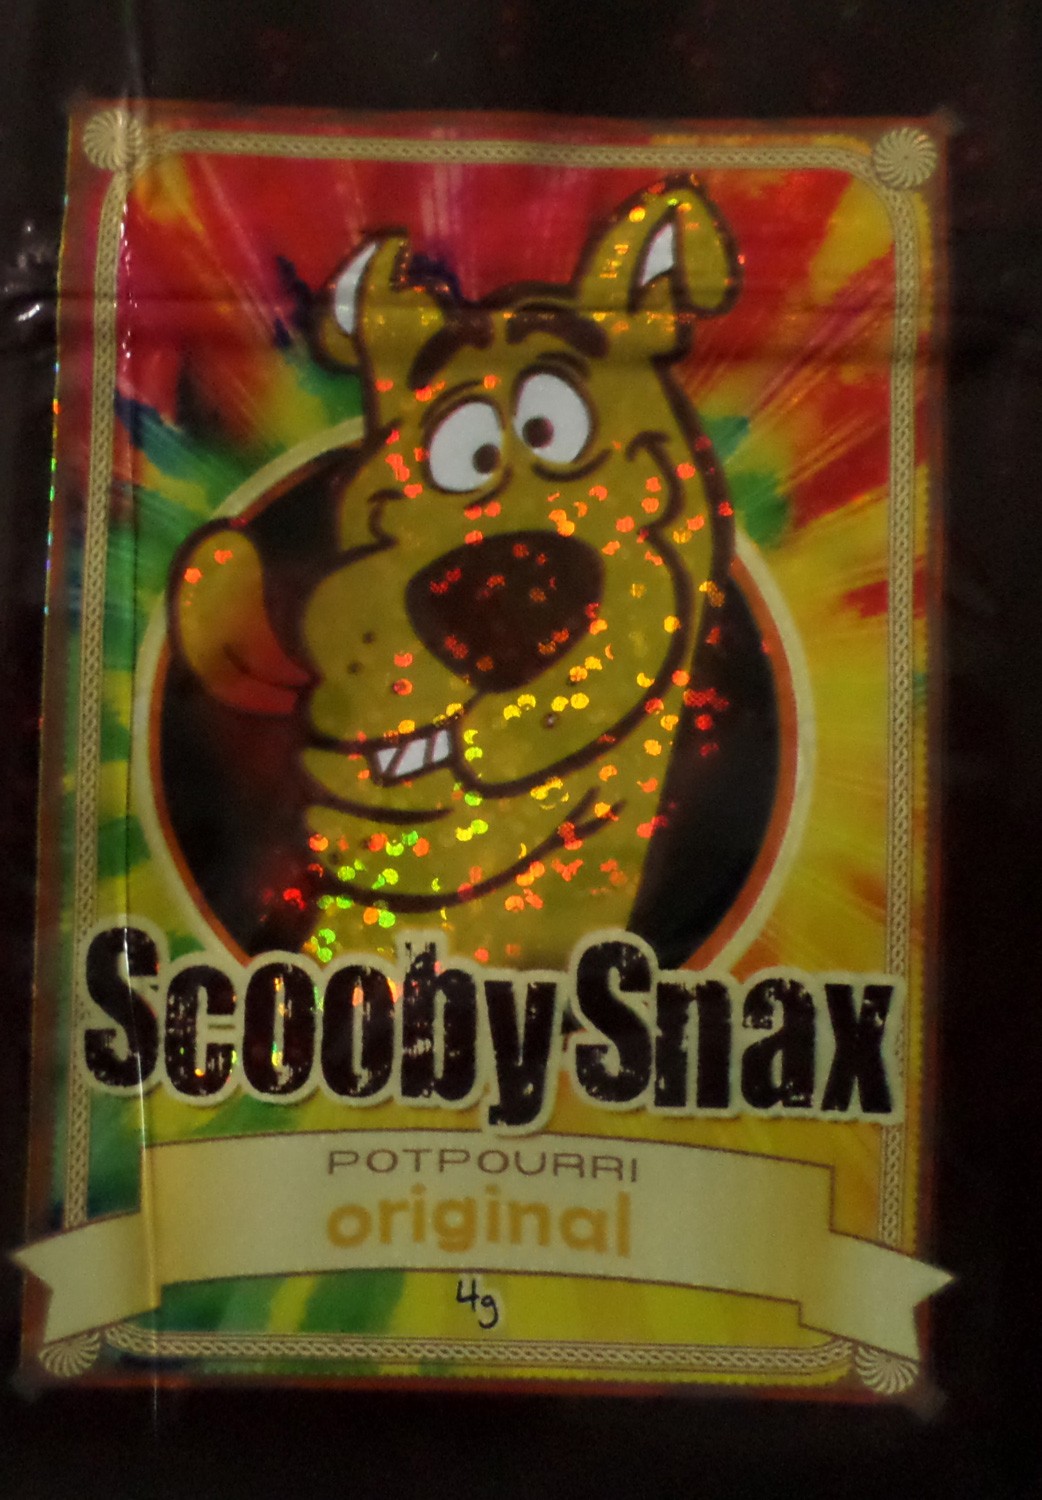 Scooby Snax 2 4g incense